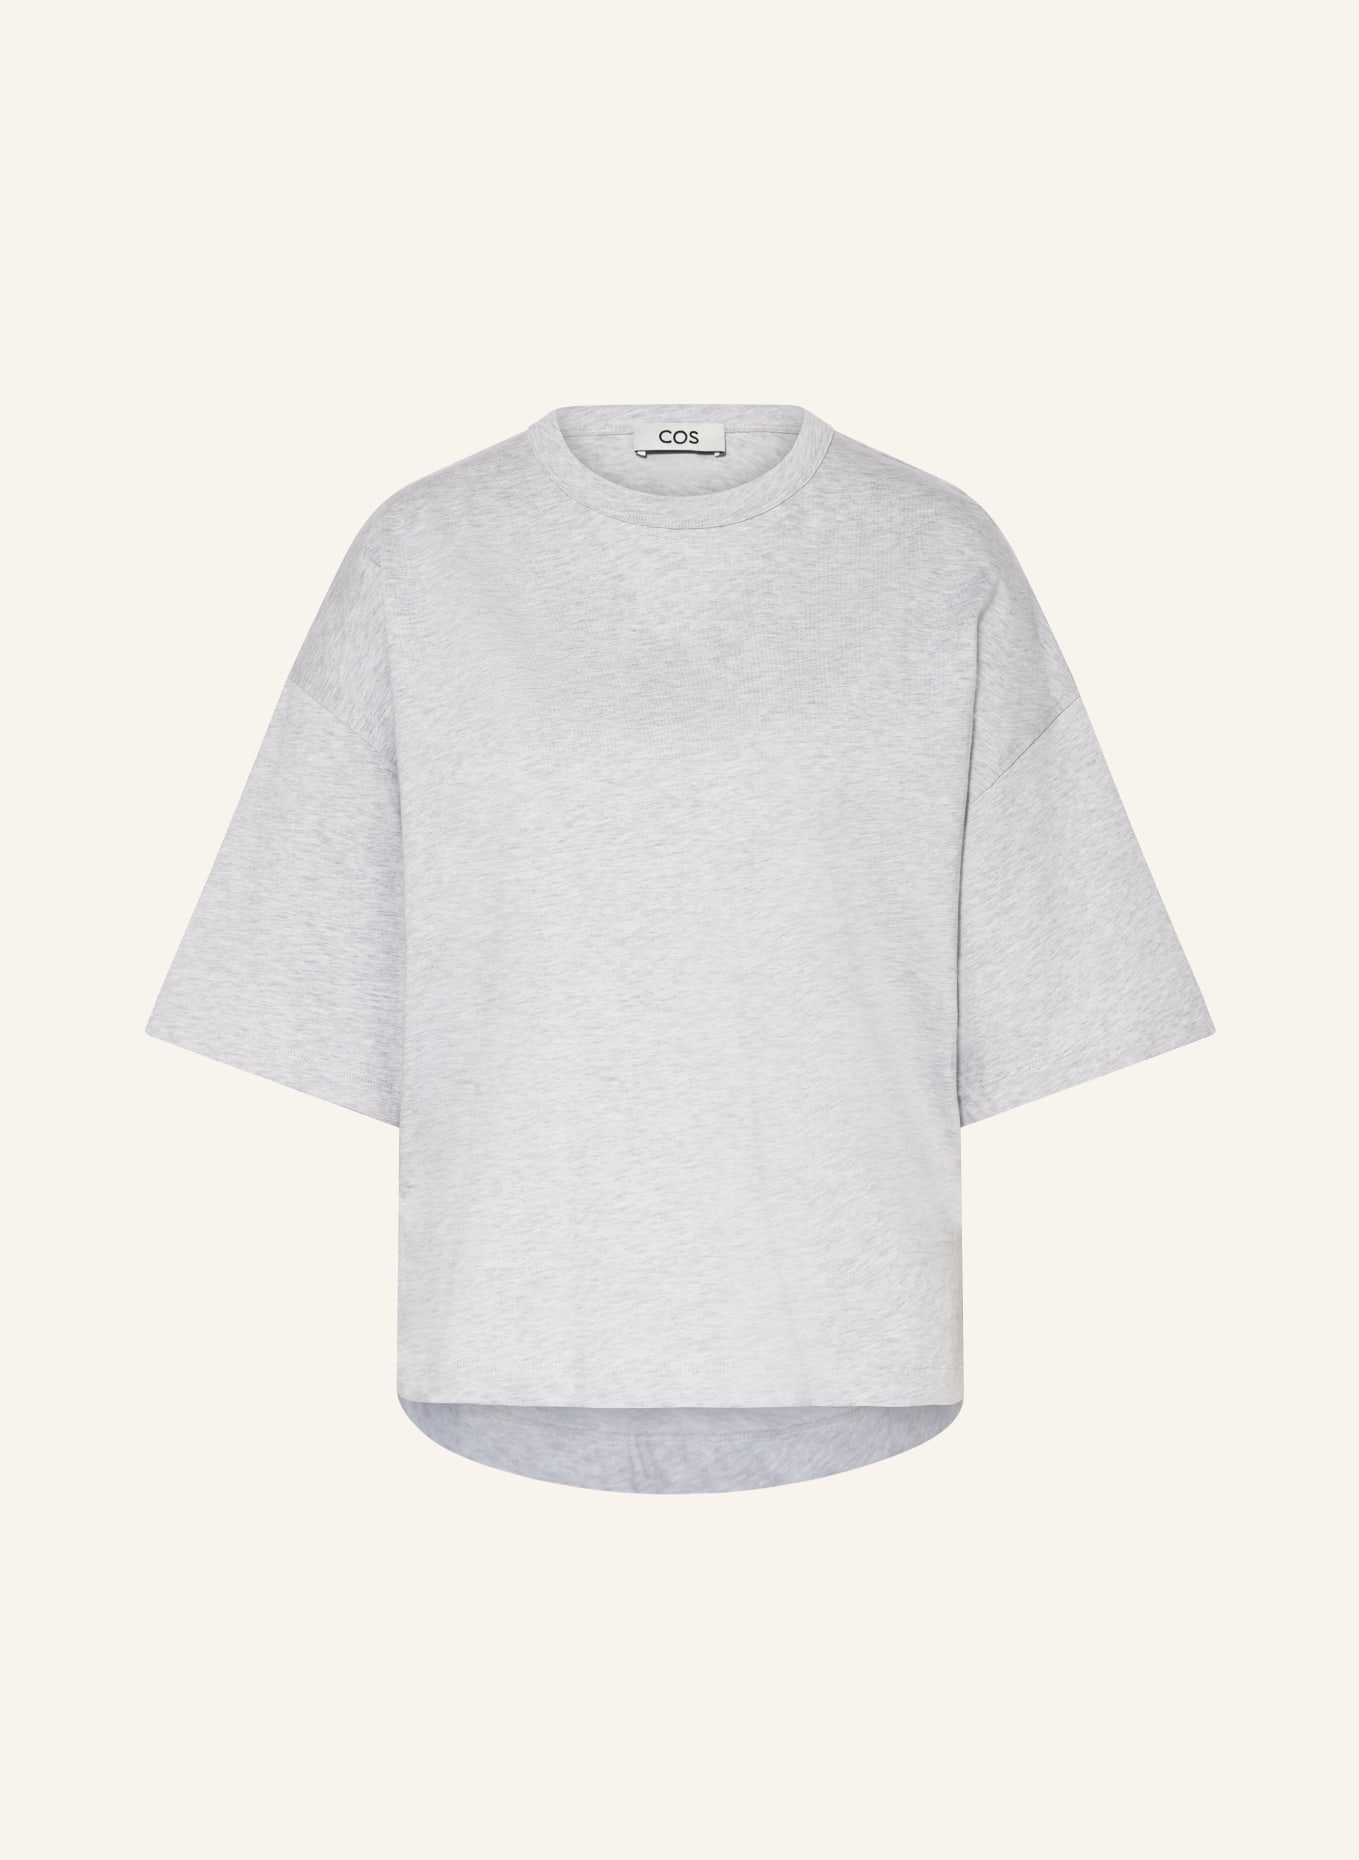 COS T-shirt, Color: GRAY (Image 1)